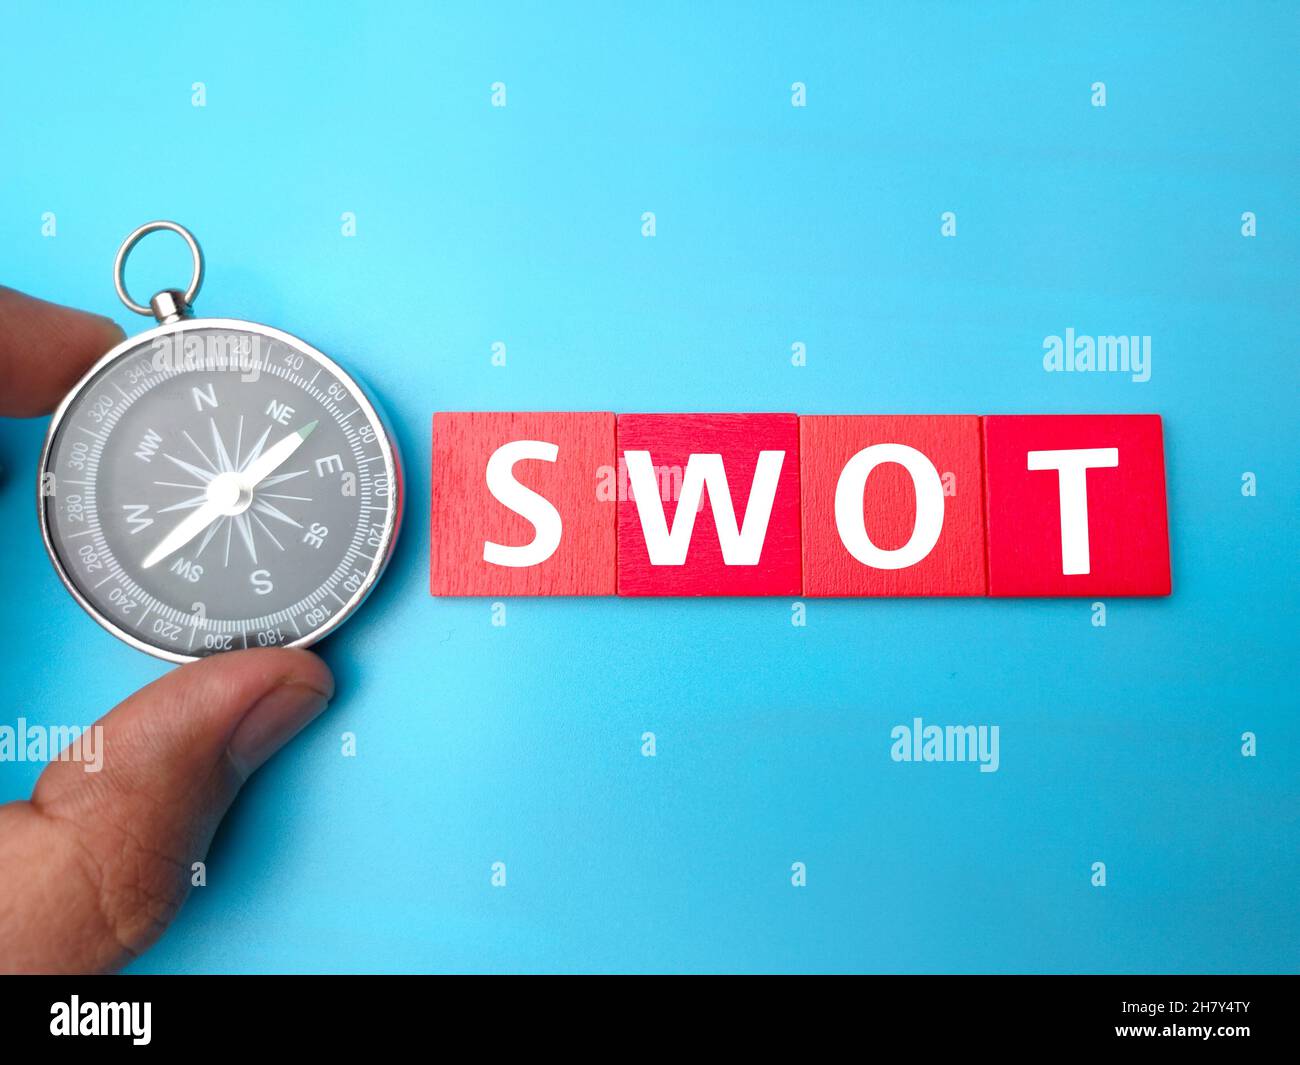 Hand holding compass and SWOT letters Stock Photo